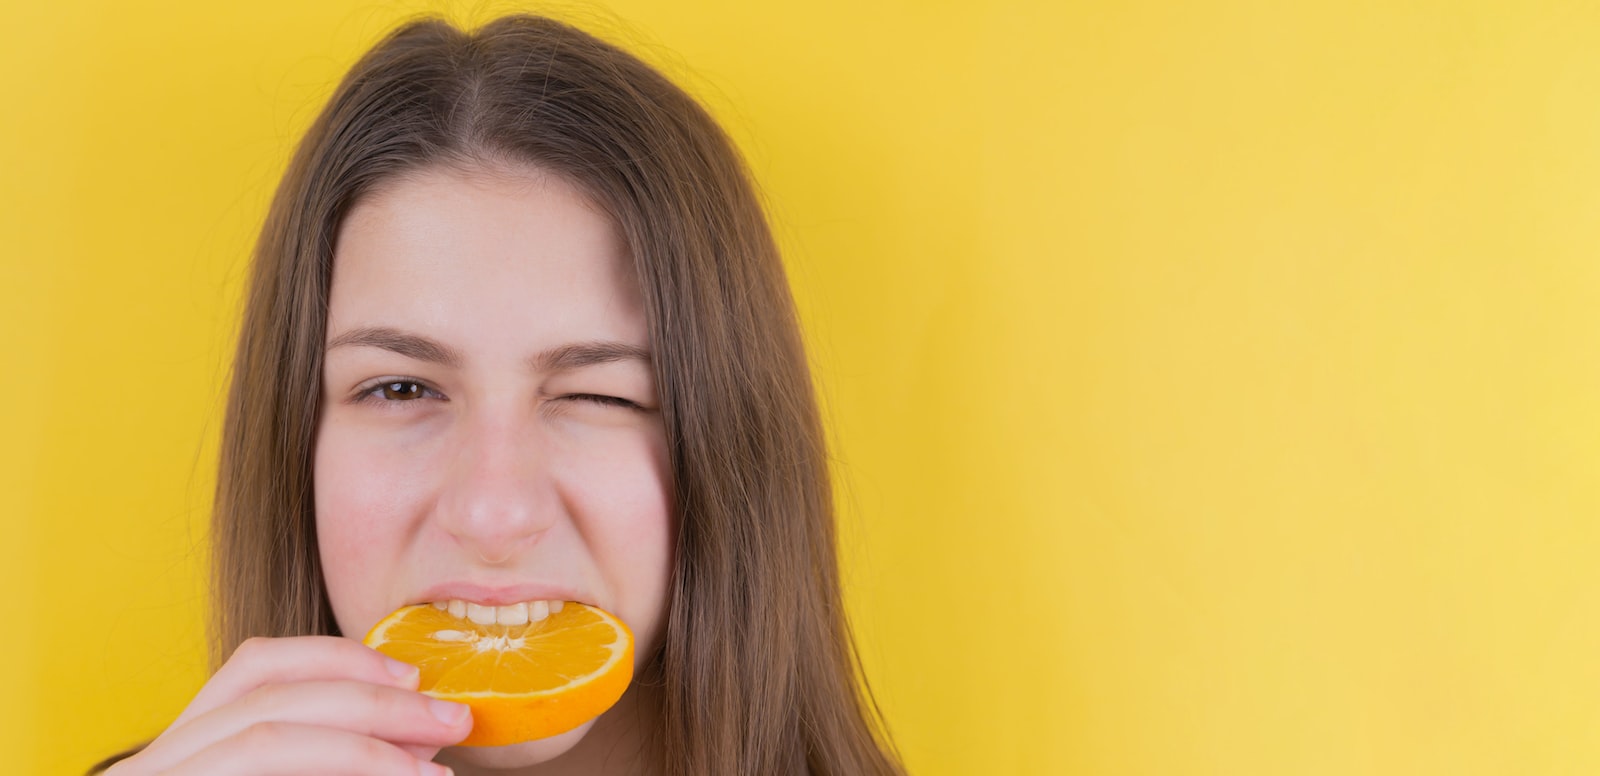 When should I eat oranges to lose weight?